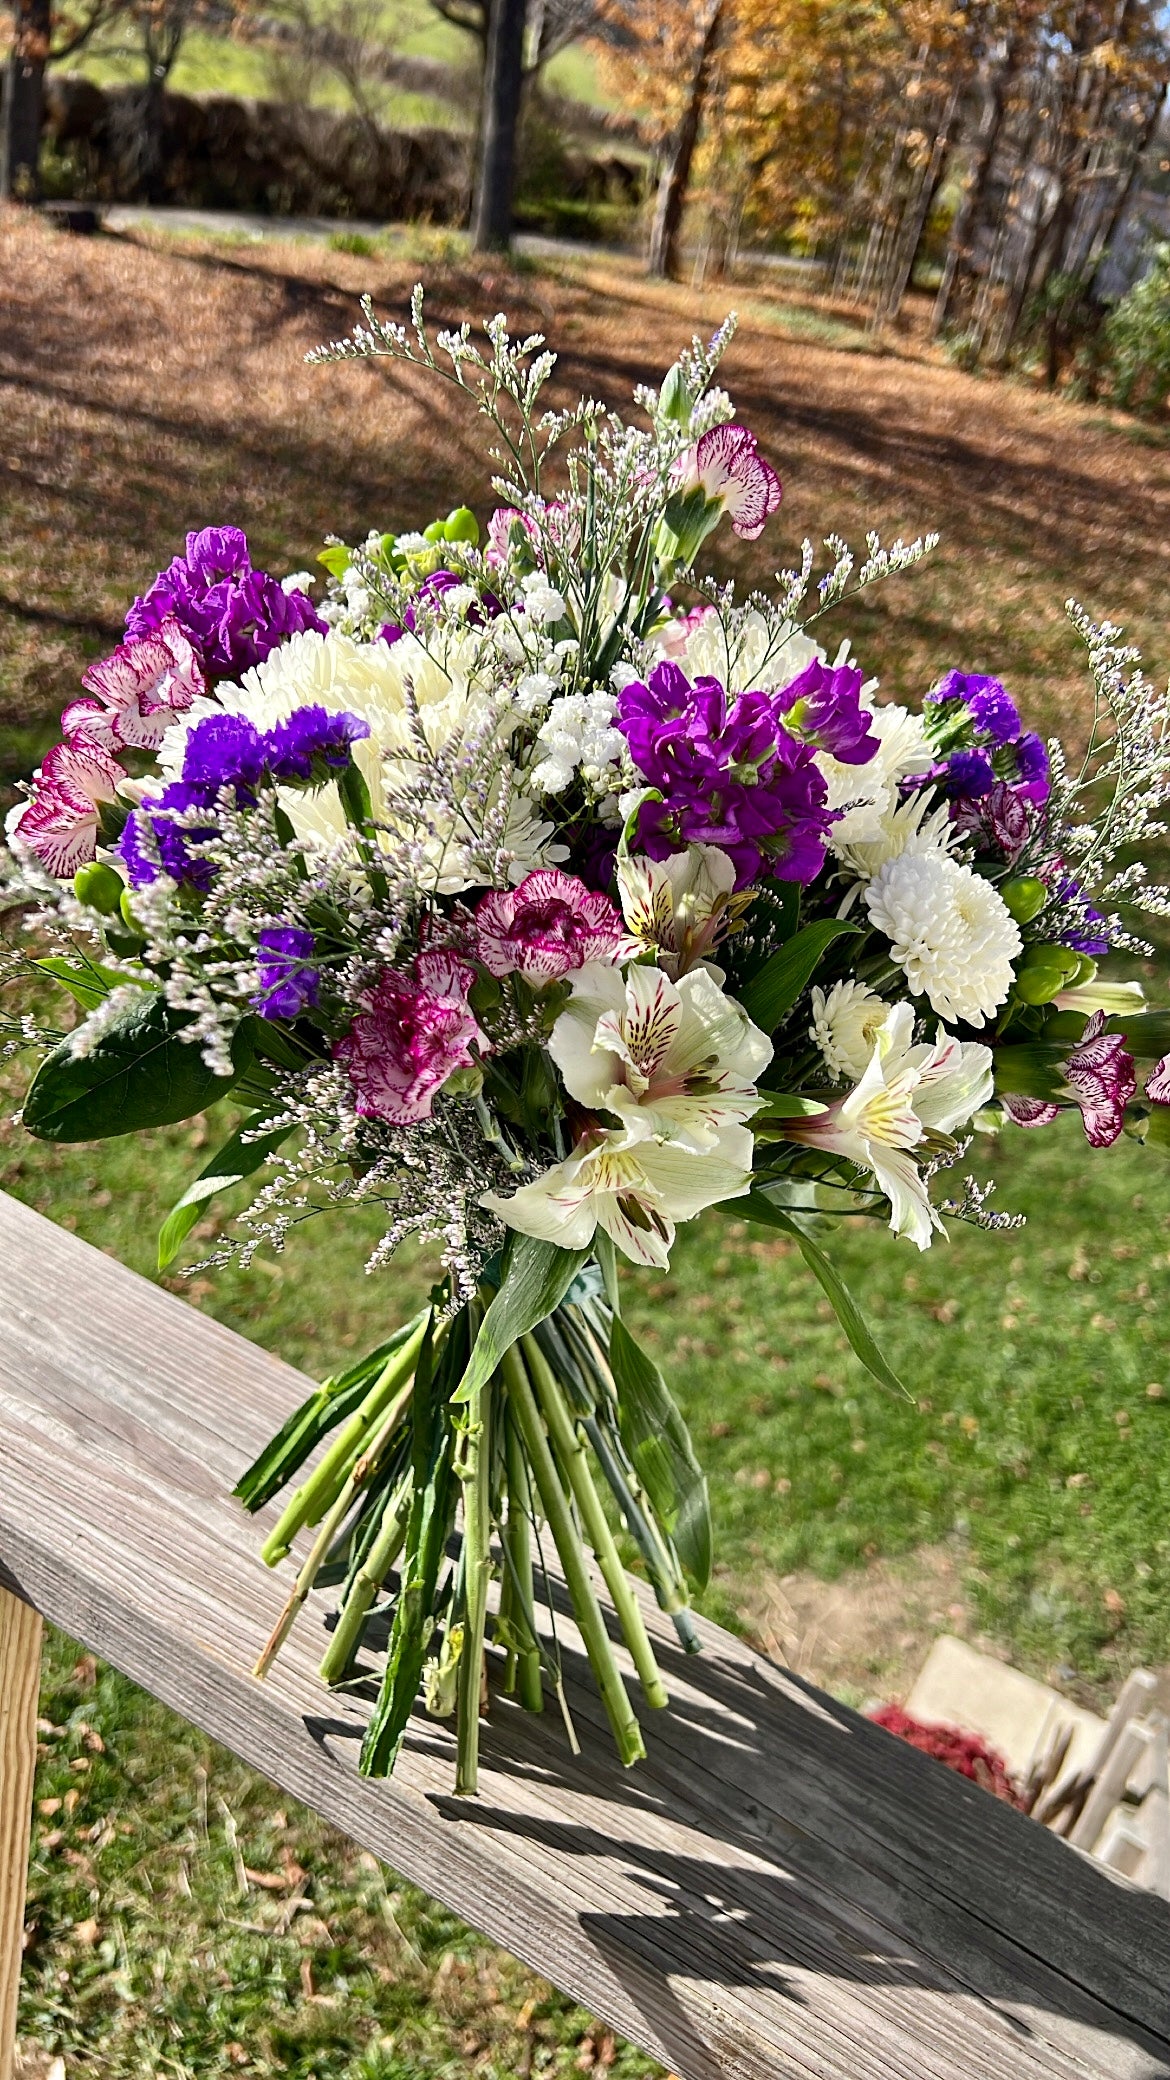 Bouquet for your date!